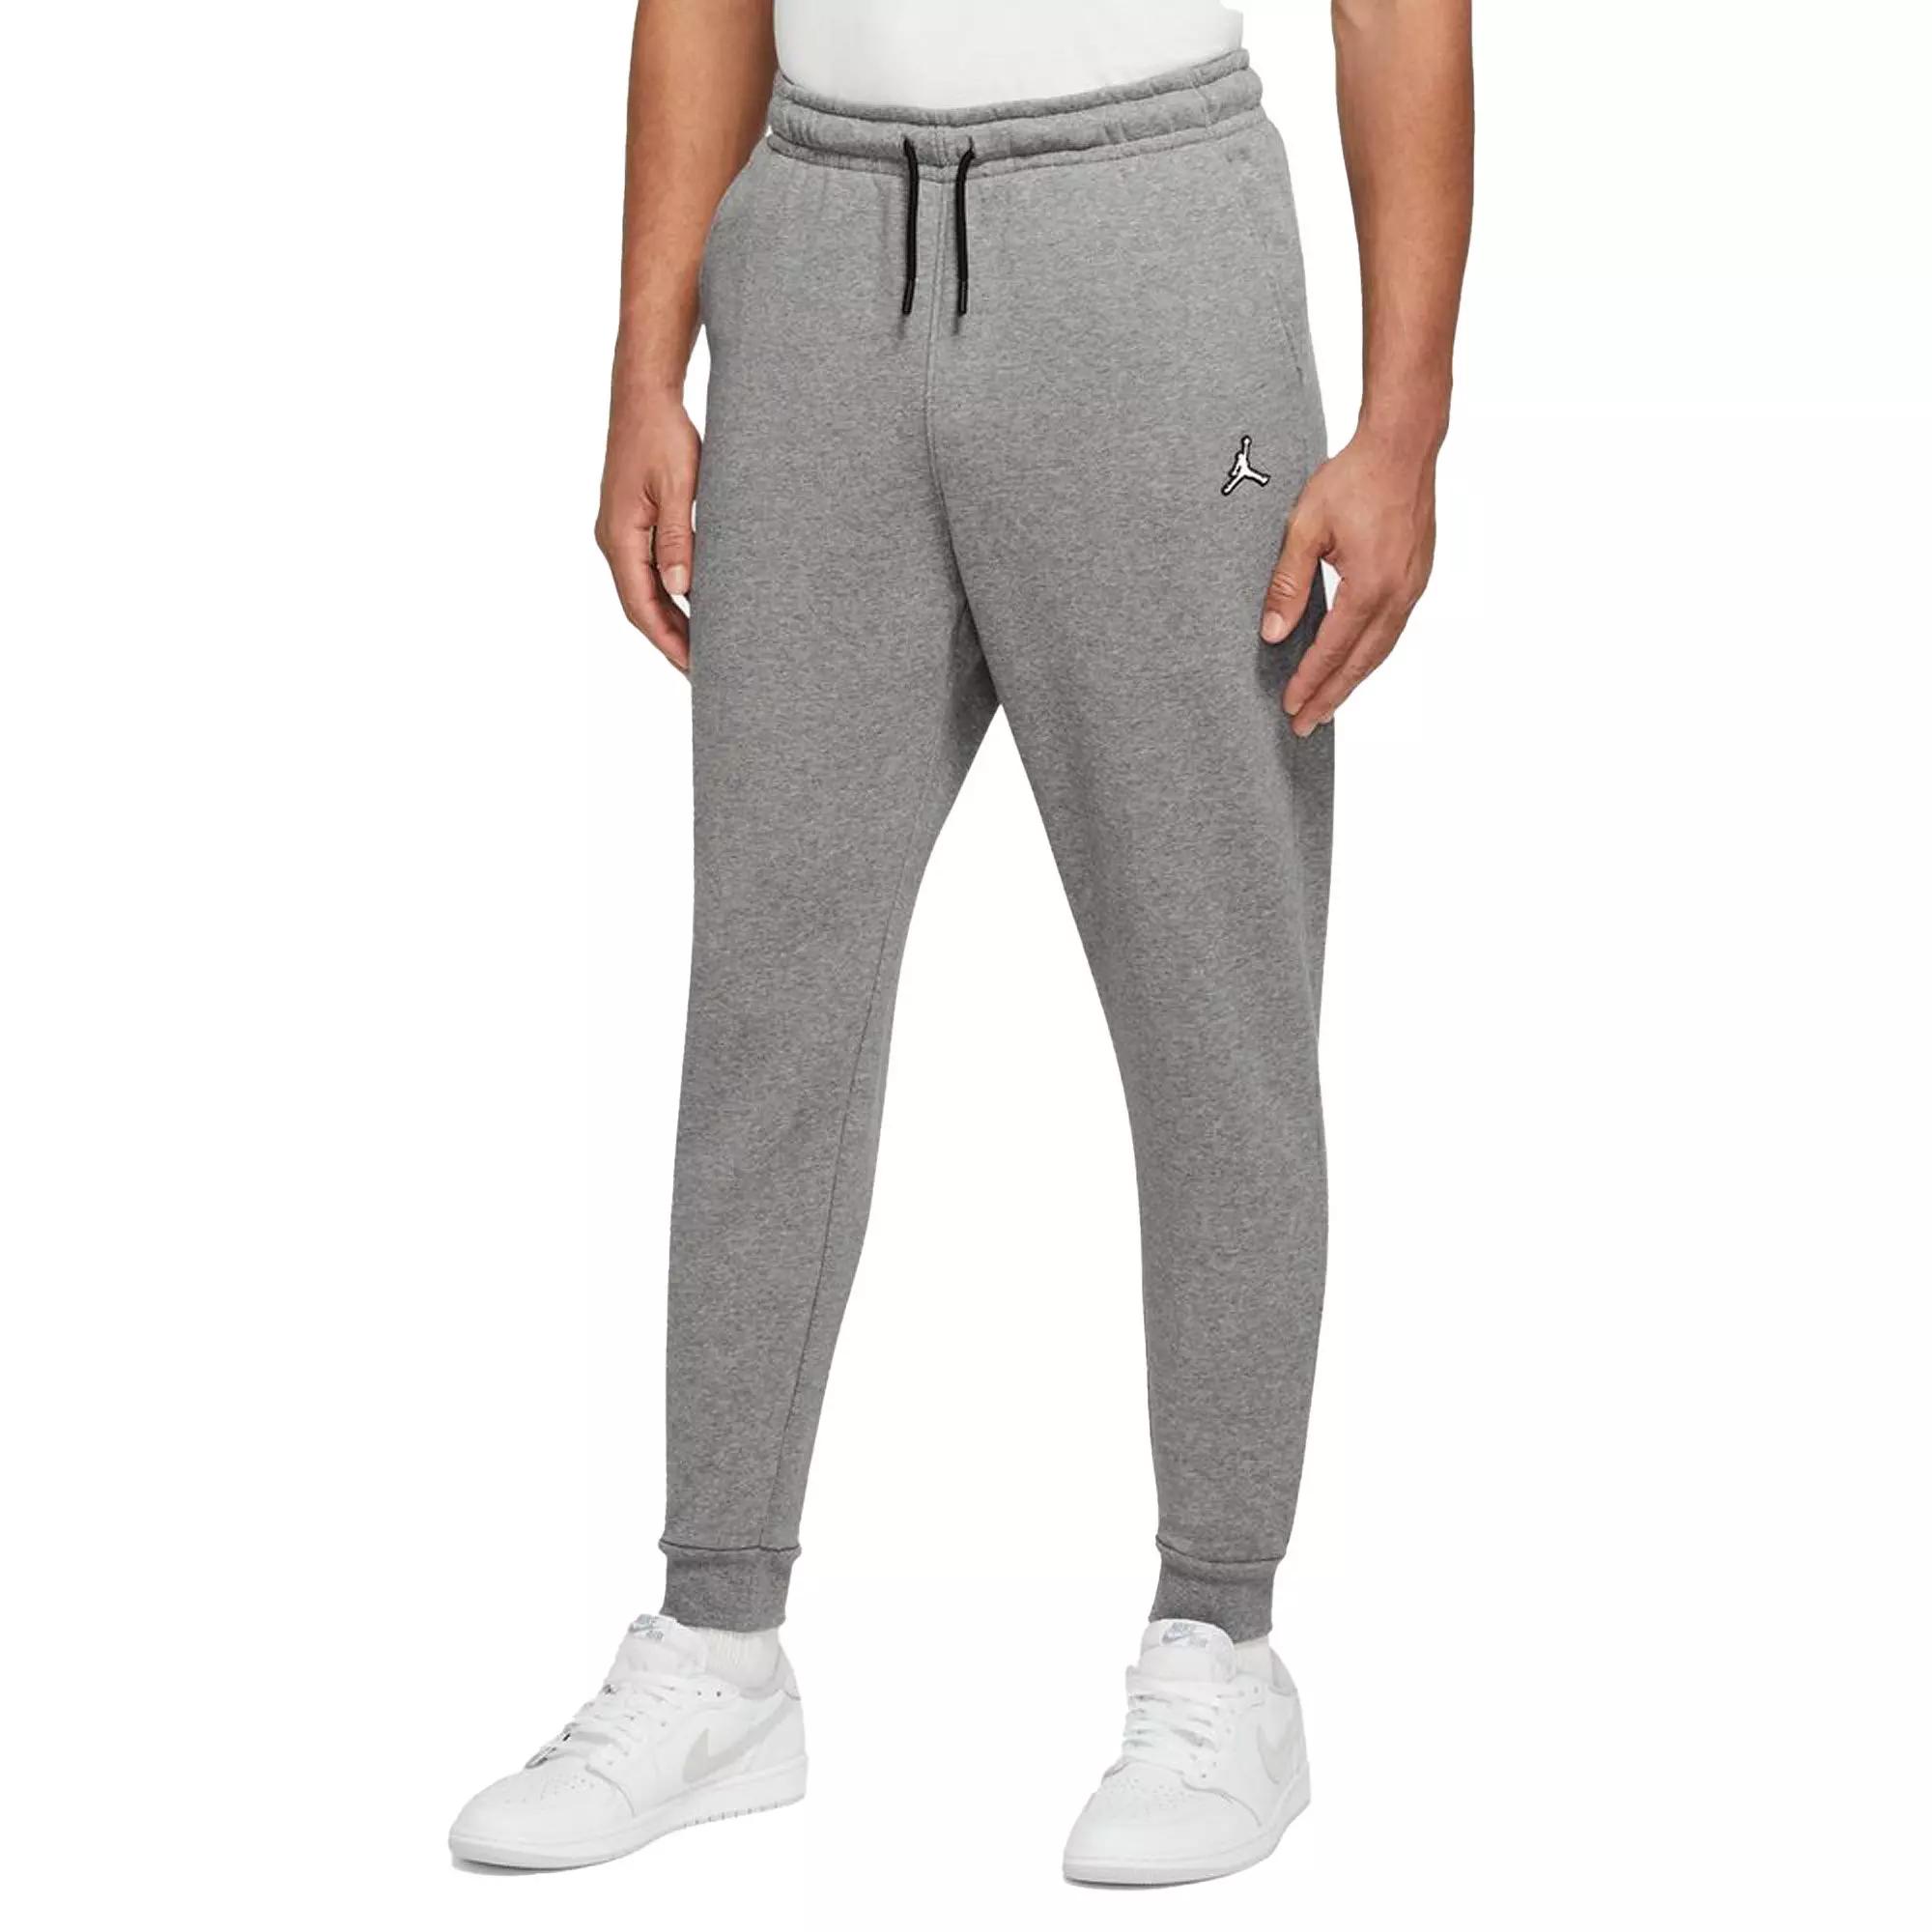 5 reasons to love joggers - Flaunt and Center  Black joggers outfit,  Fashion, Houston fashion